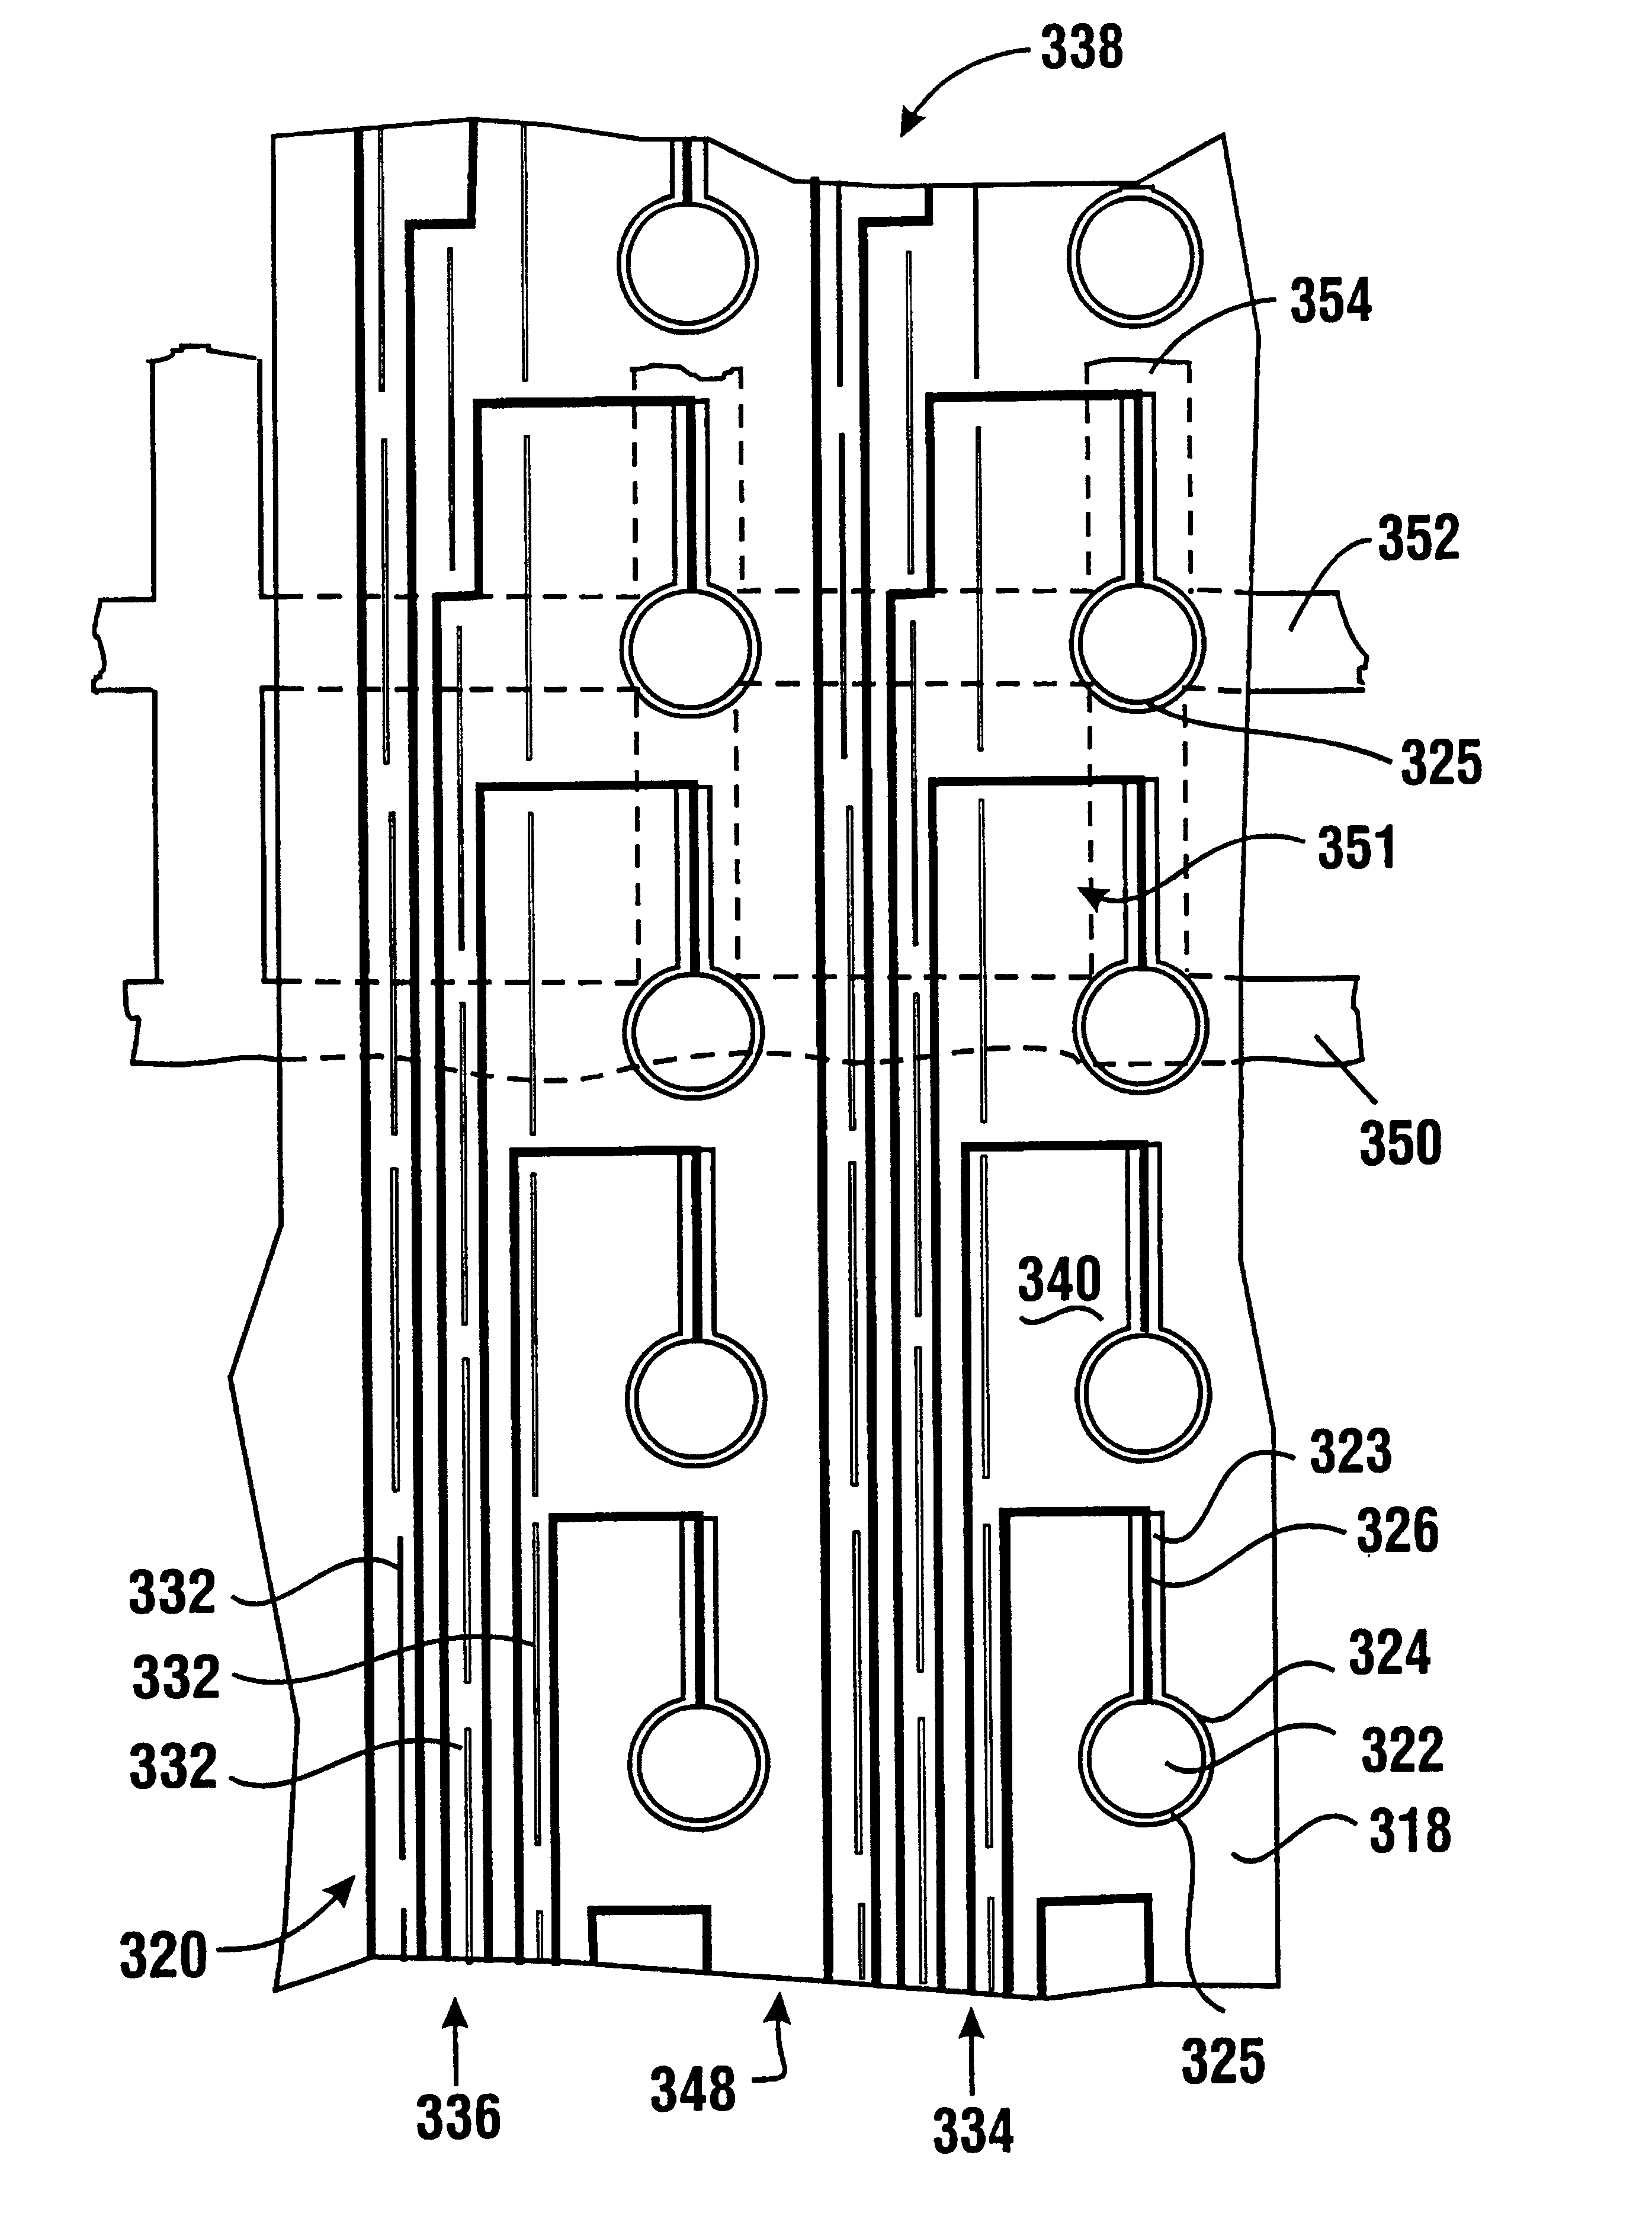 Emg electrode apparatus and positioning system